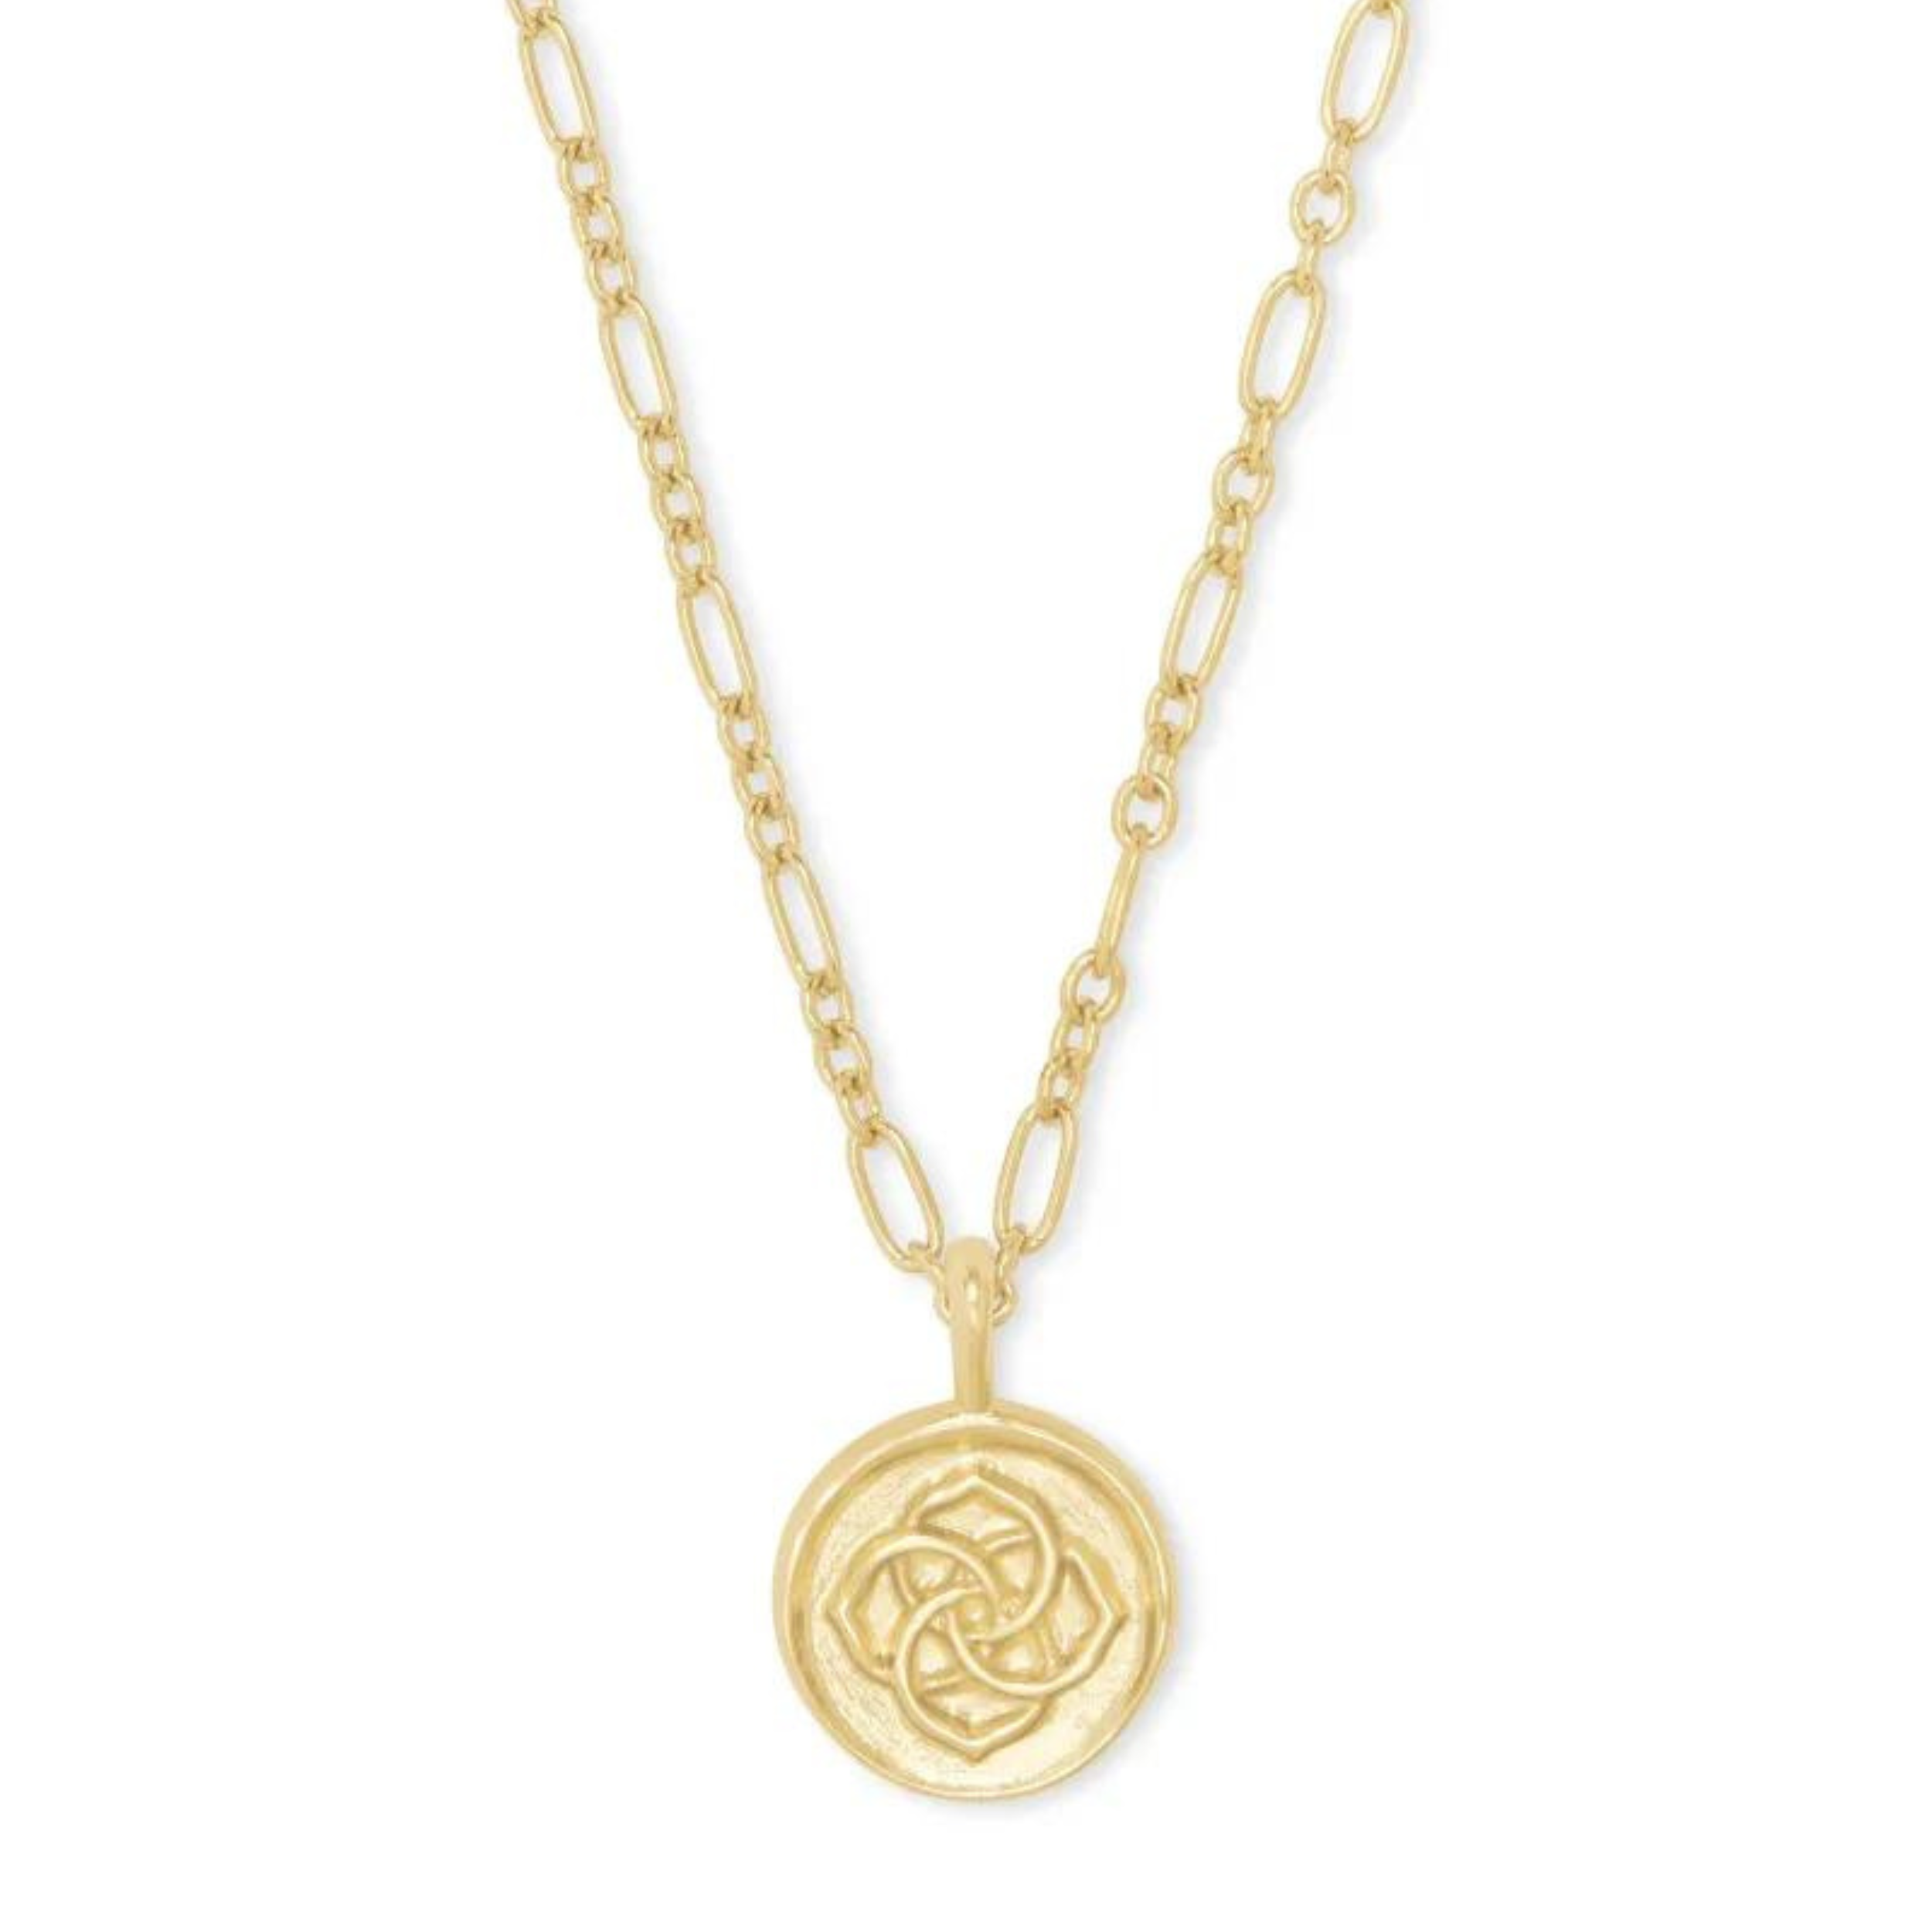 Gold necklace with gold coin pendant, pictured on a white background.